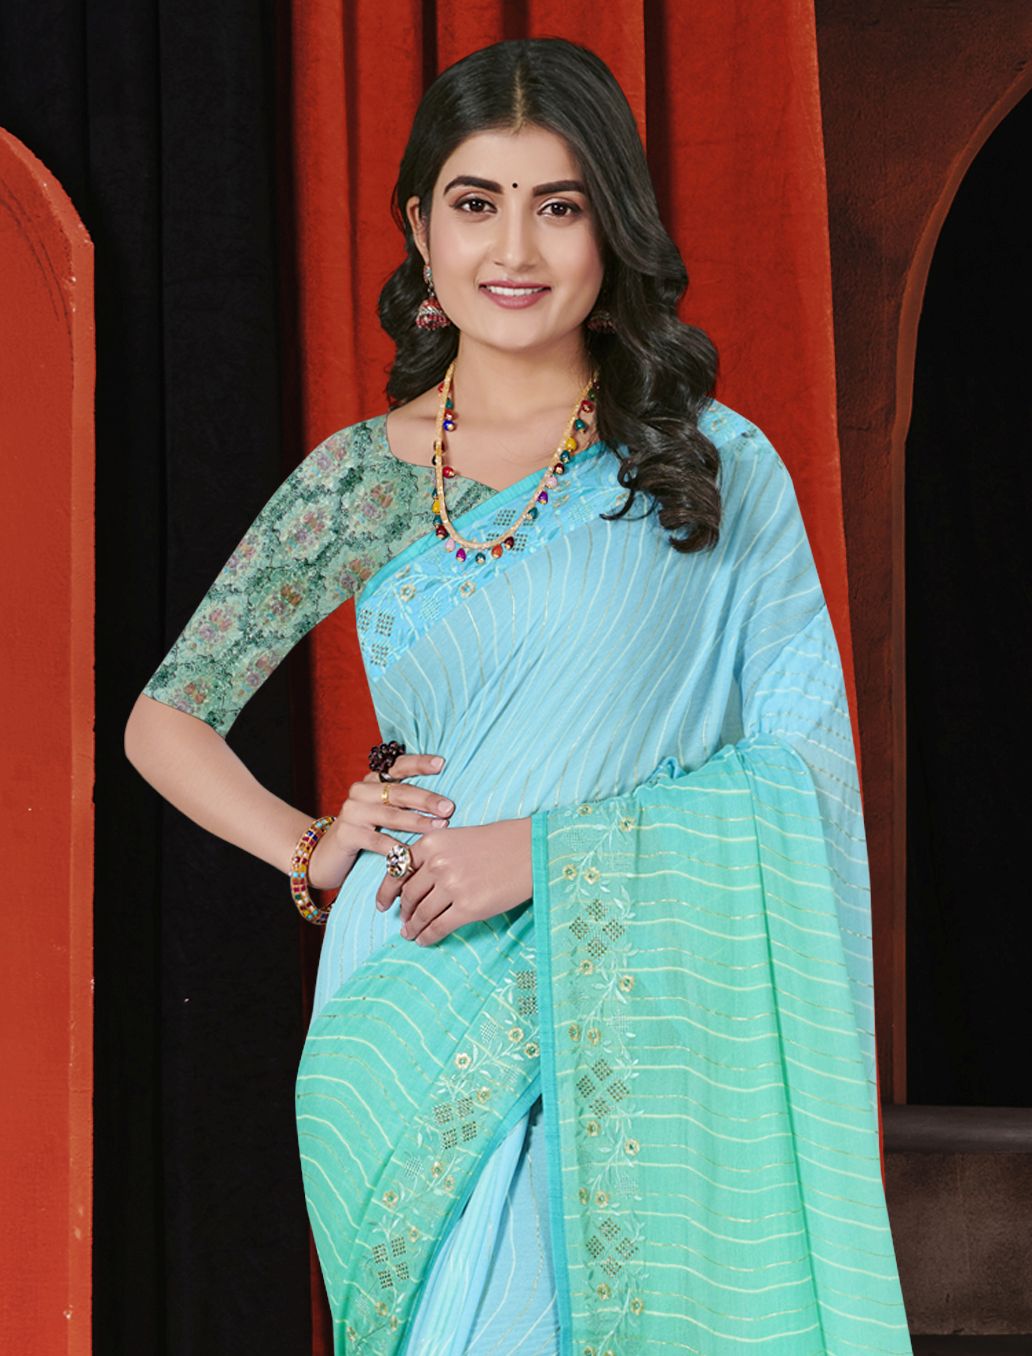 Turquoise Georgette Soft Silk Saree: Perfect for Party & Wedding Wear